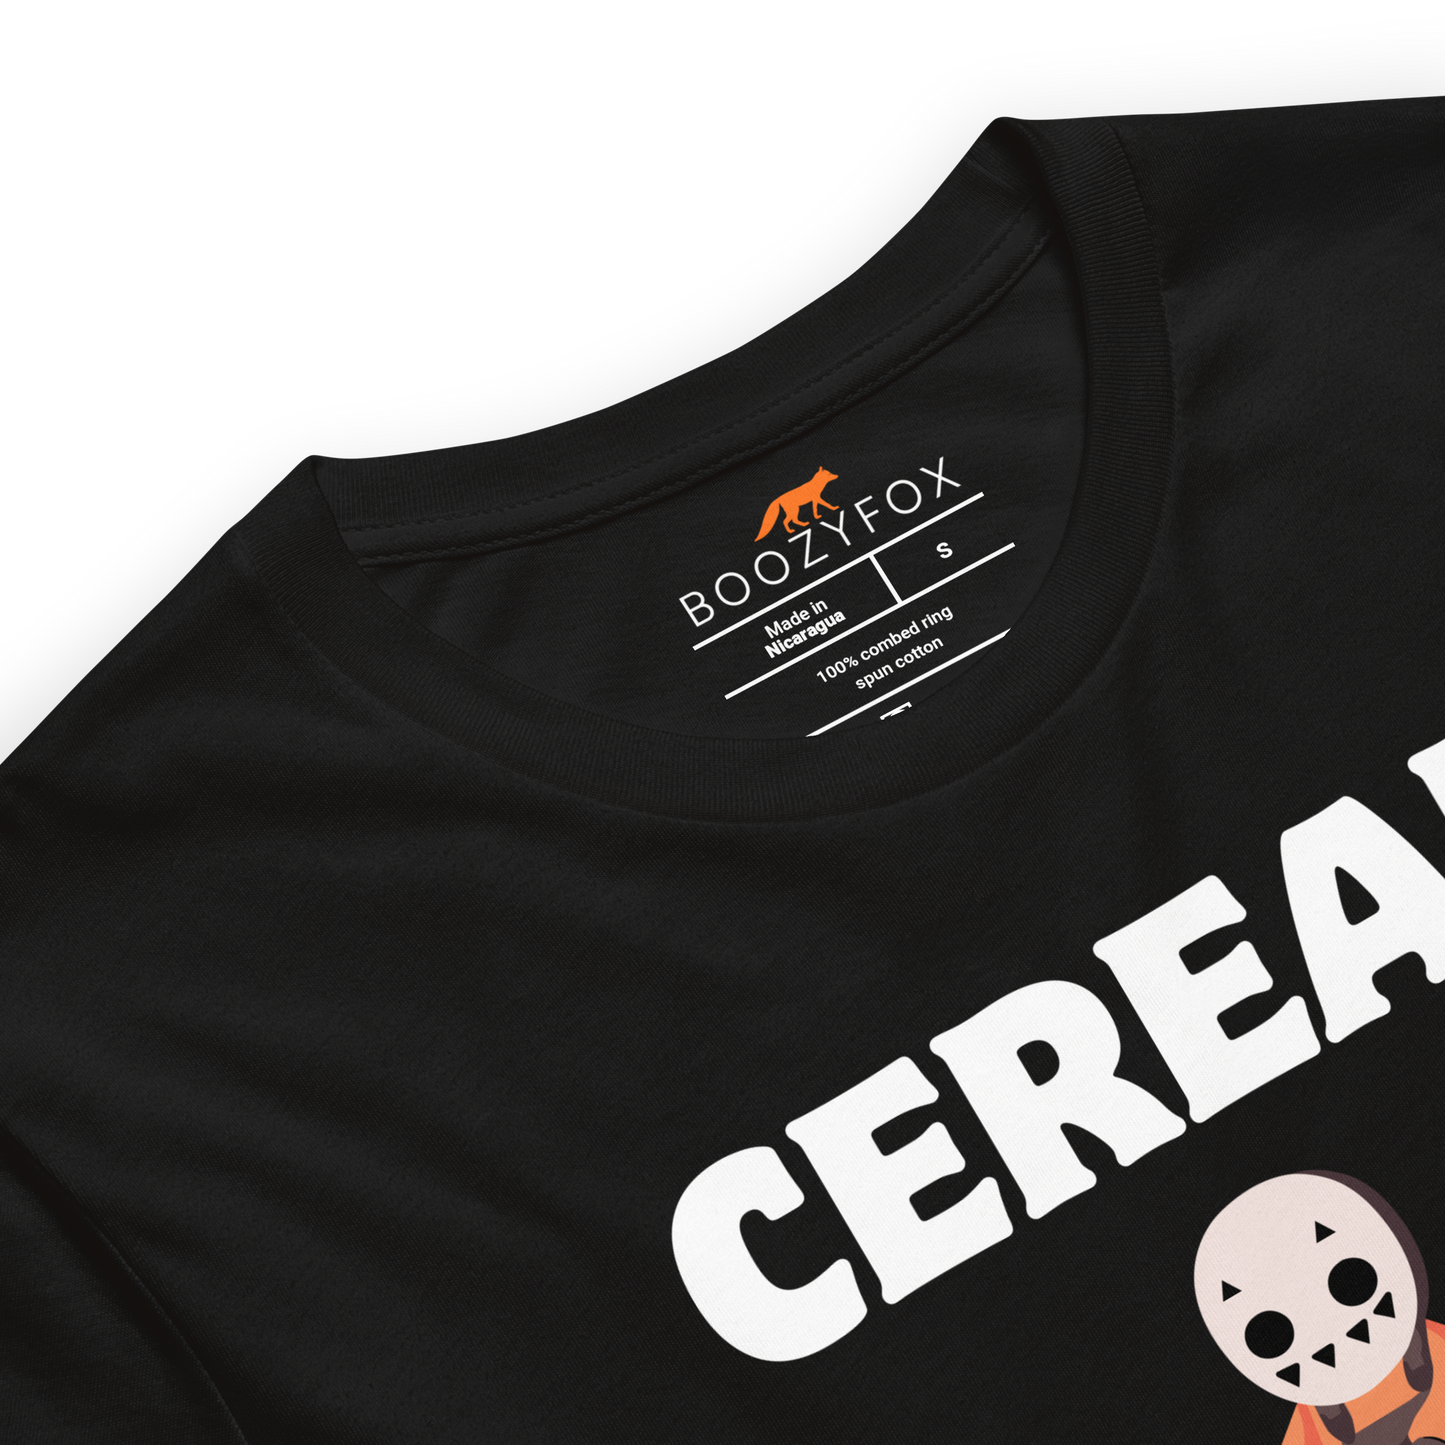 Product details of a Black Premium Cereal Killer Tee featuring a Cereal Killer graphic on the chest - Funny Graphic Tees - Boozy Fox